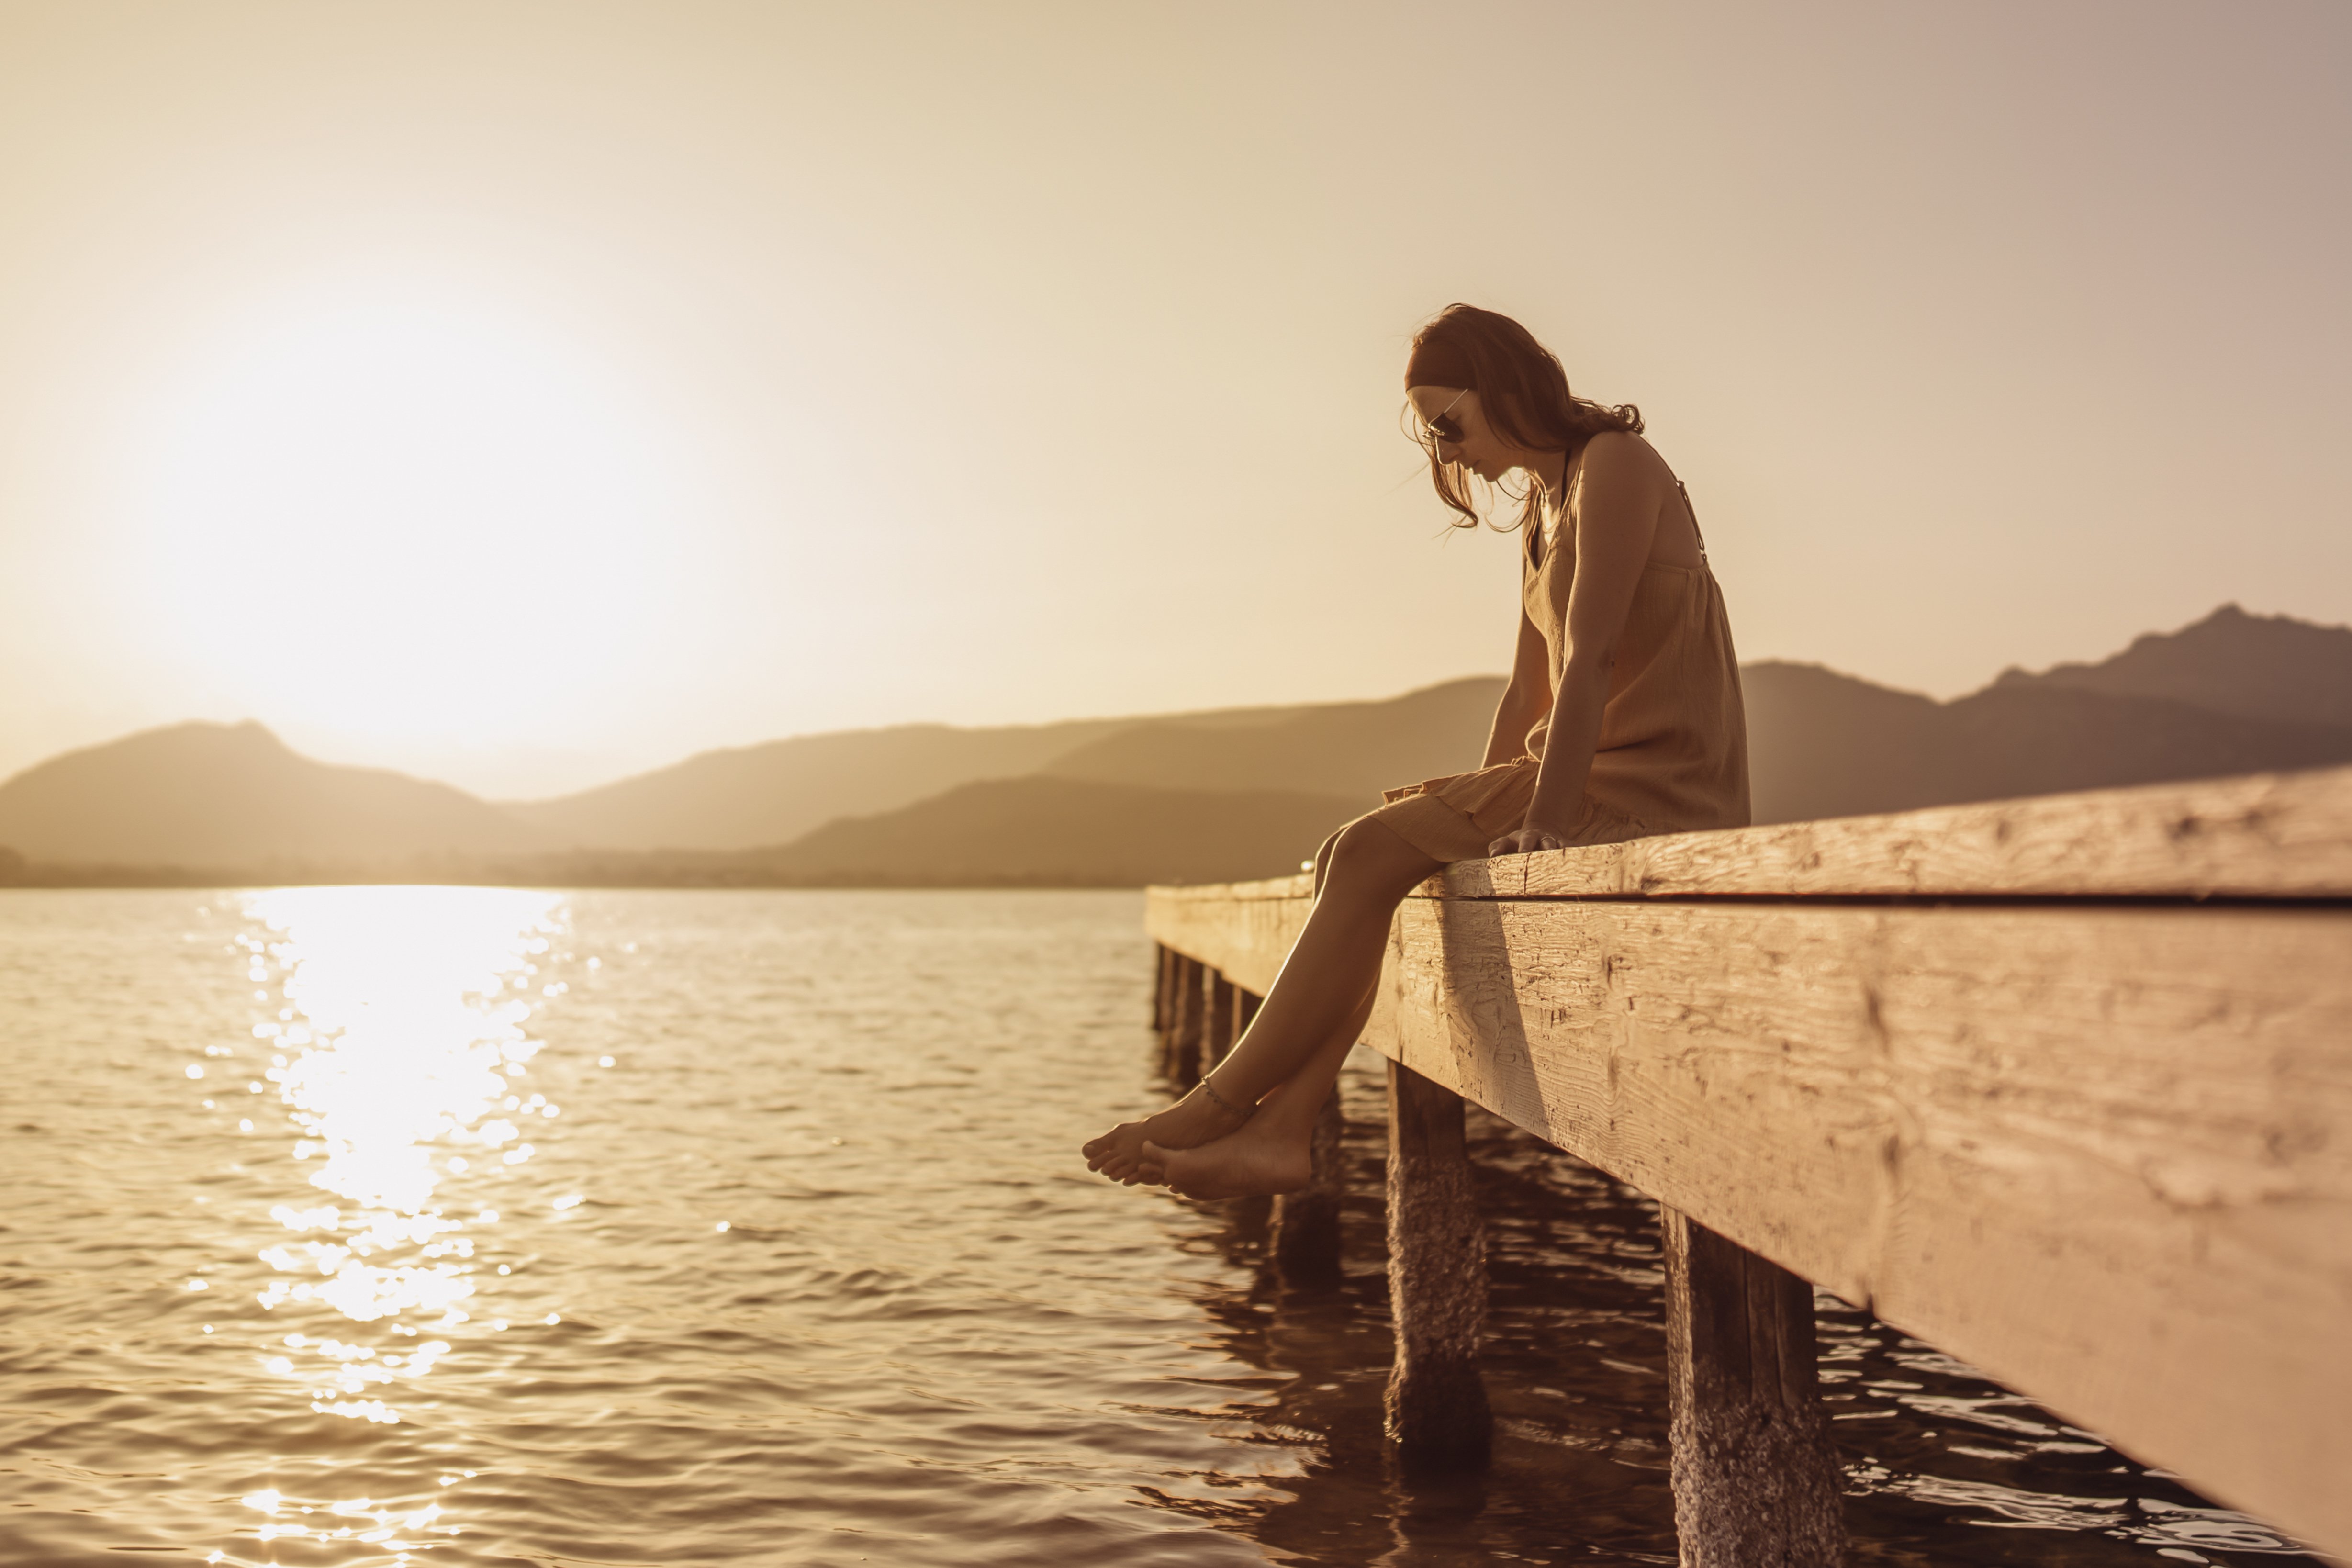 A young woman sitting on a pier at sunset.│ Source: Shutterstock